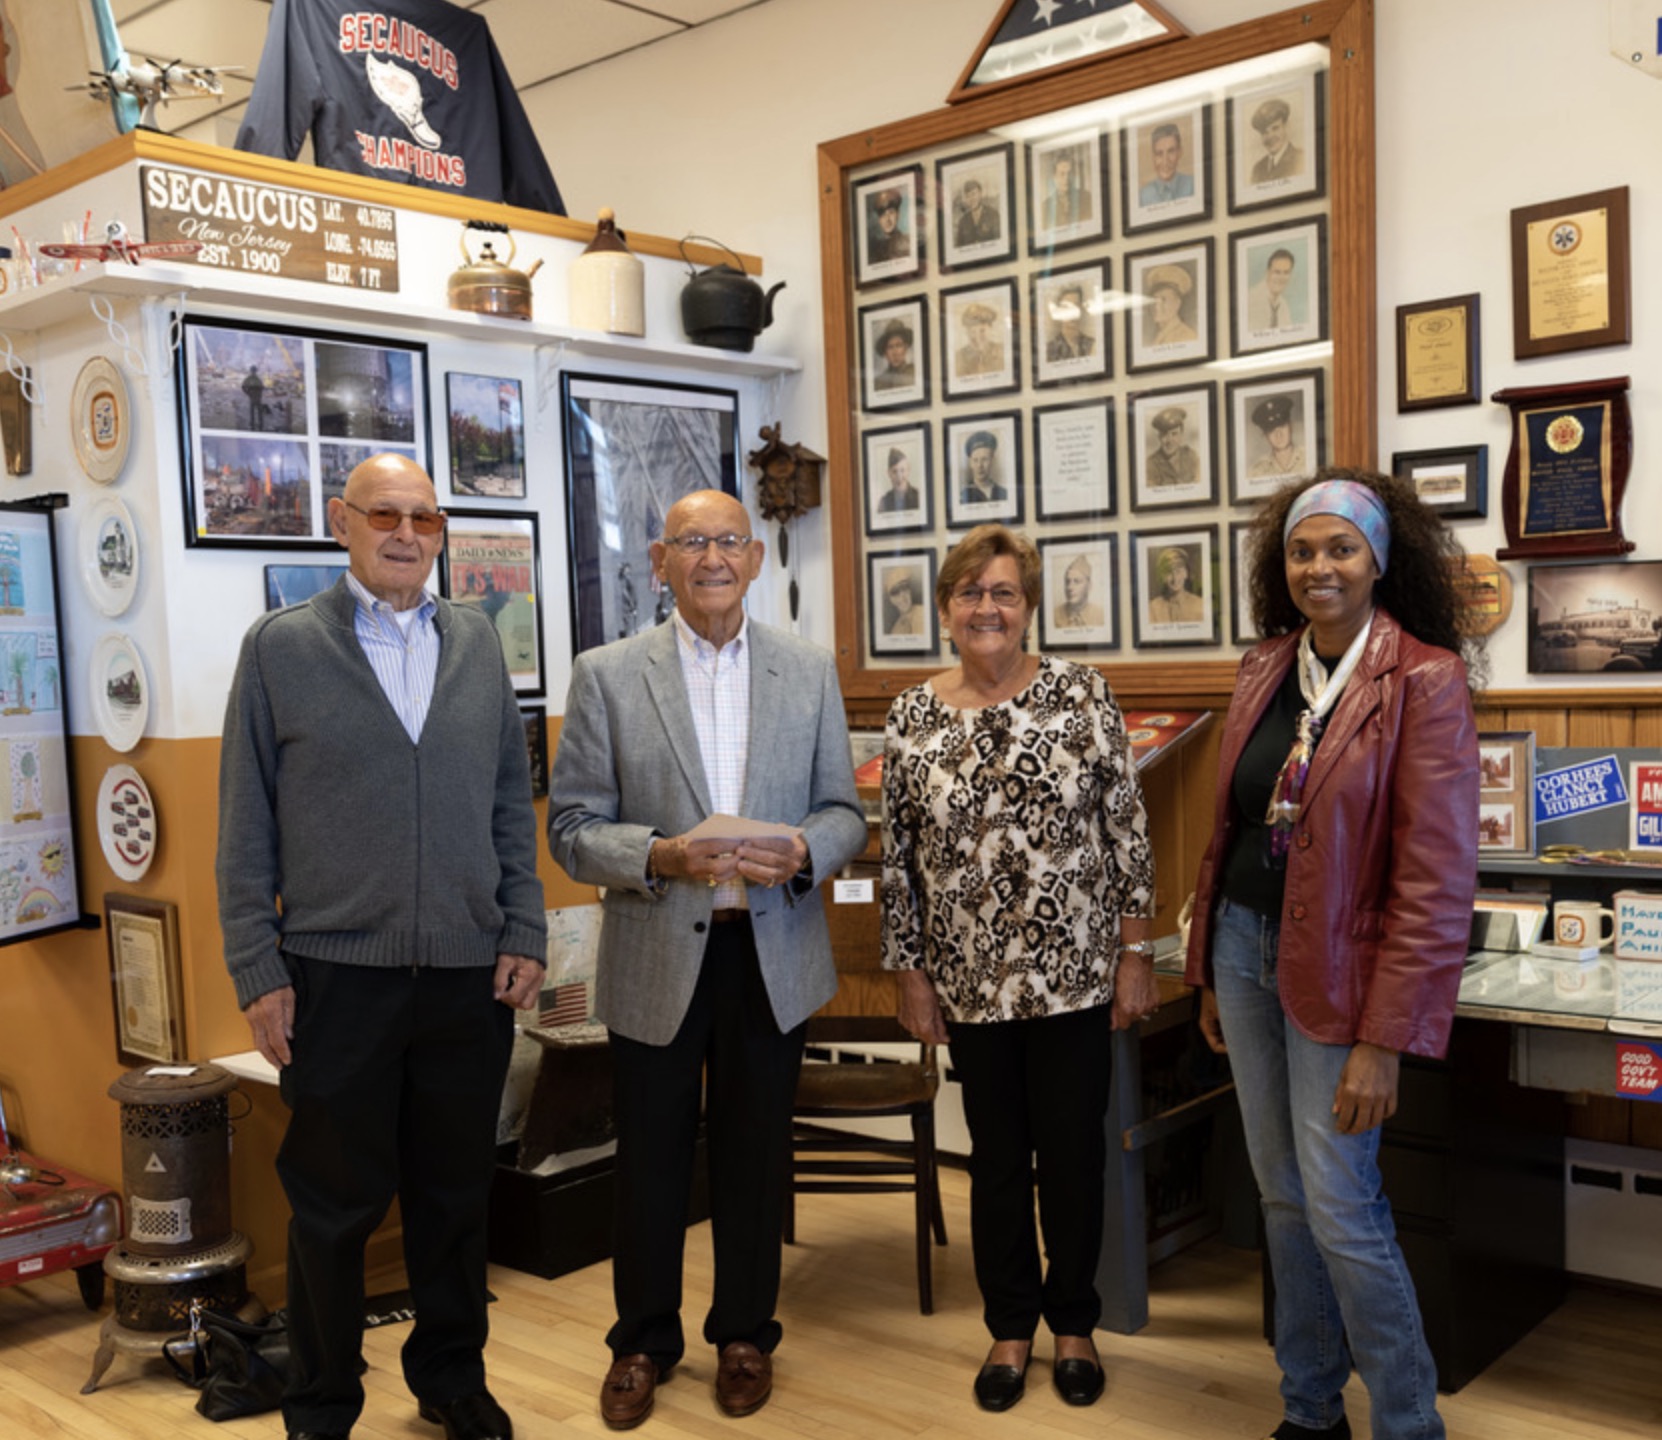 After the dedication the Meisch Family visited the museum.  From left to right:  John Heflich, Ralph Block, Dottie Heflich and Angela. 